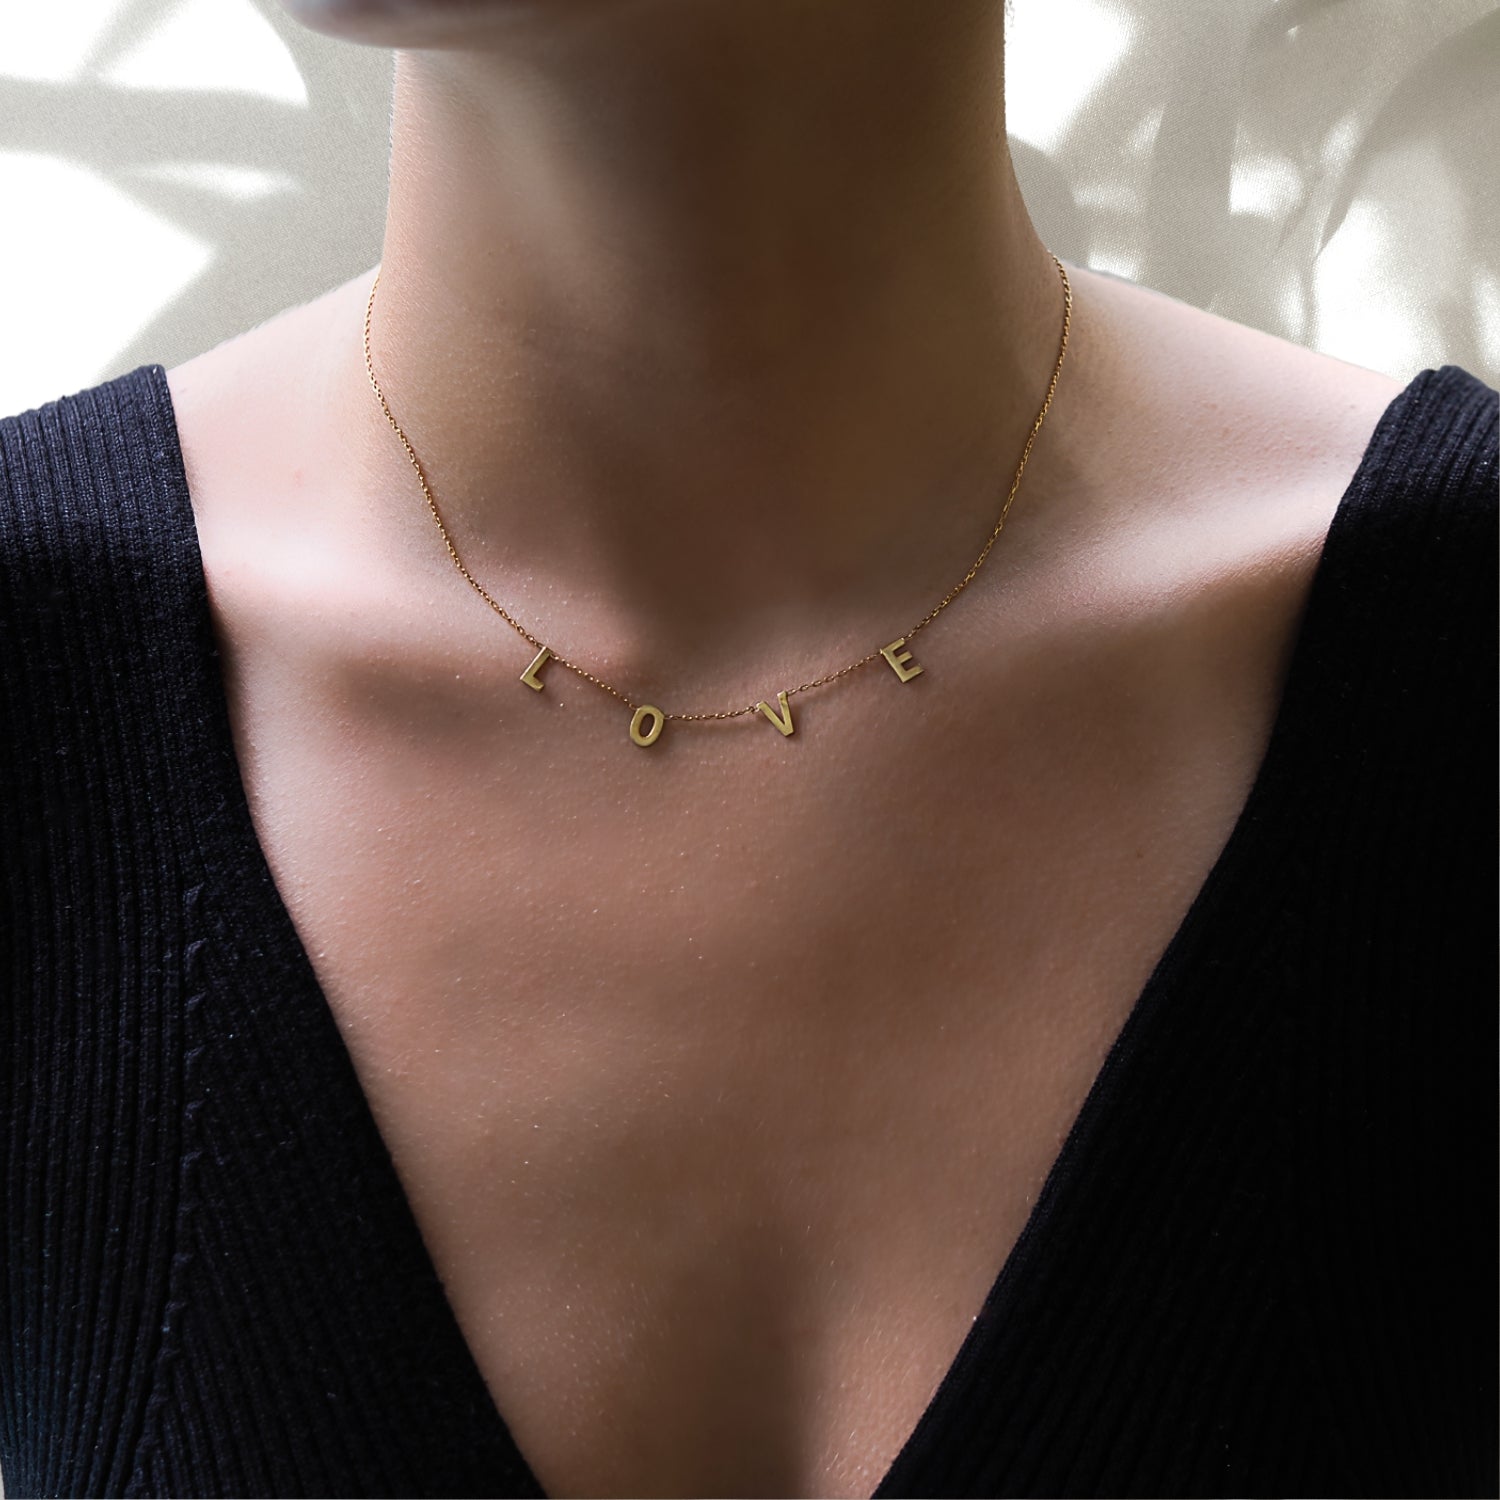 See how the Love Necklace enhances our model's natural beauty, adding a touch of elegance and sophistication to her neckline.